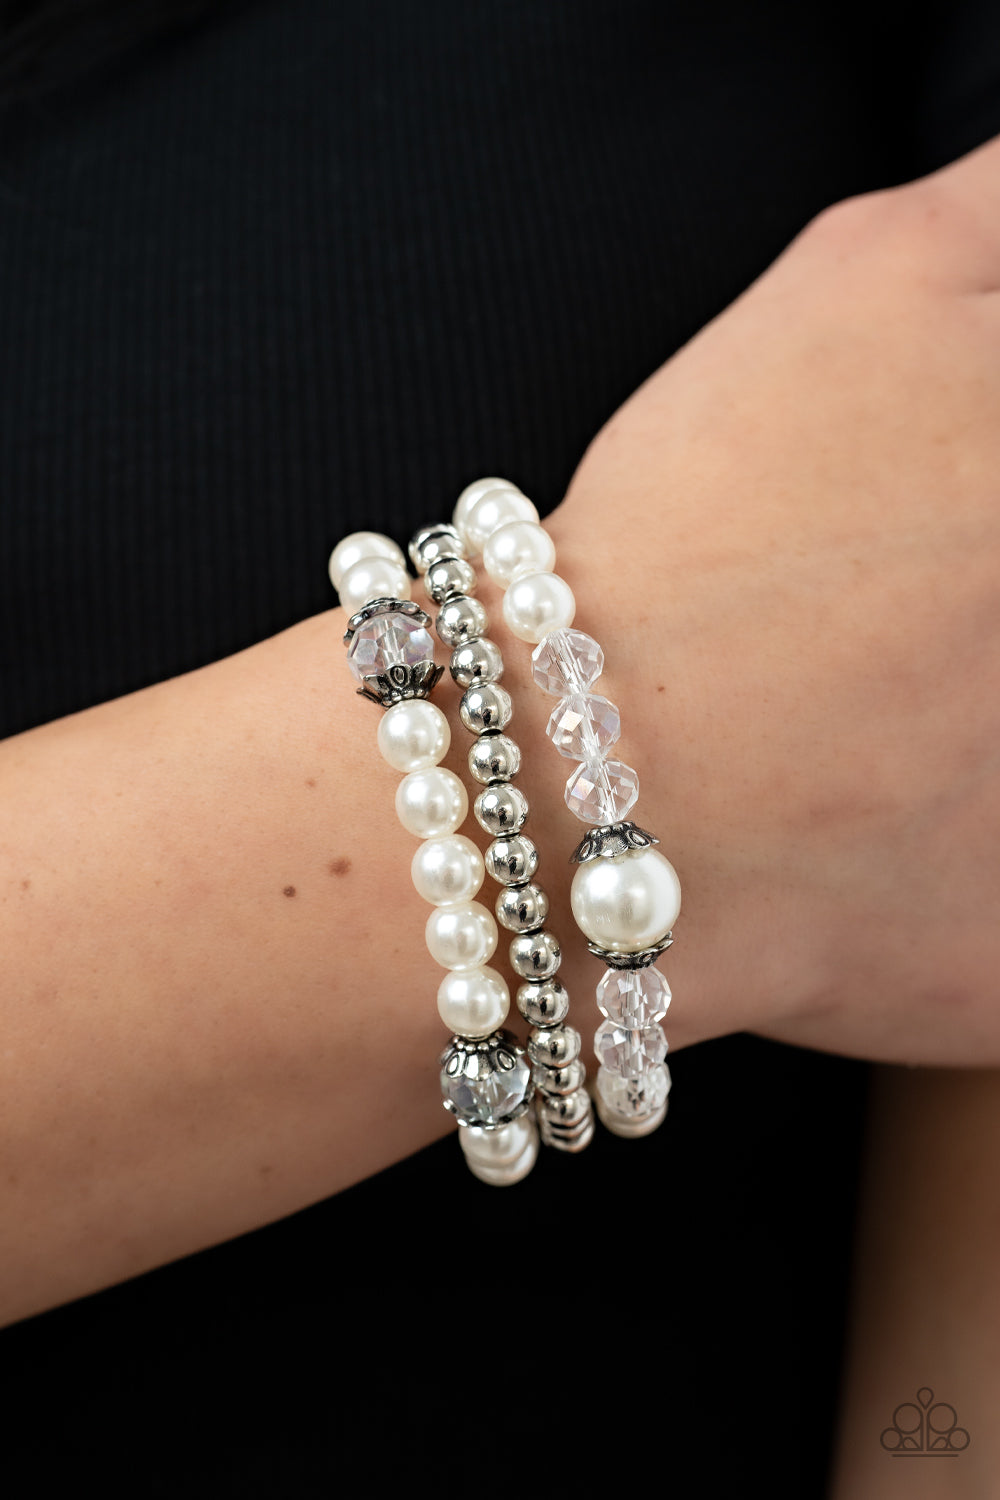 Positively Polished - White Pearl, Silver Beads, Silver Accent, & Glassy Crystal-Like Beaded Paparazzi Stretch Bracelets